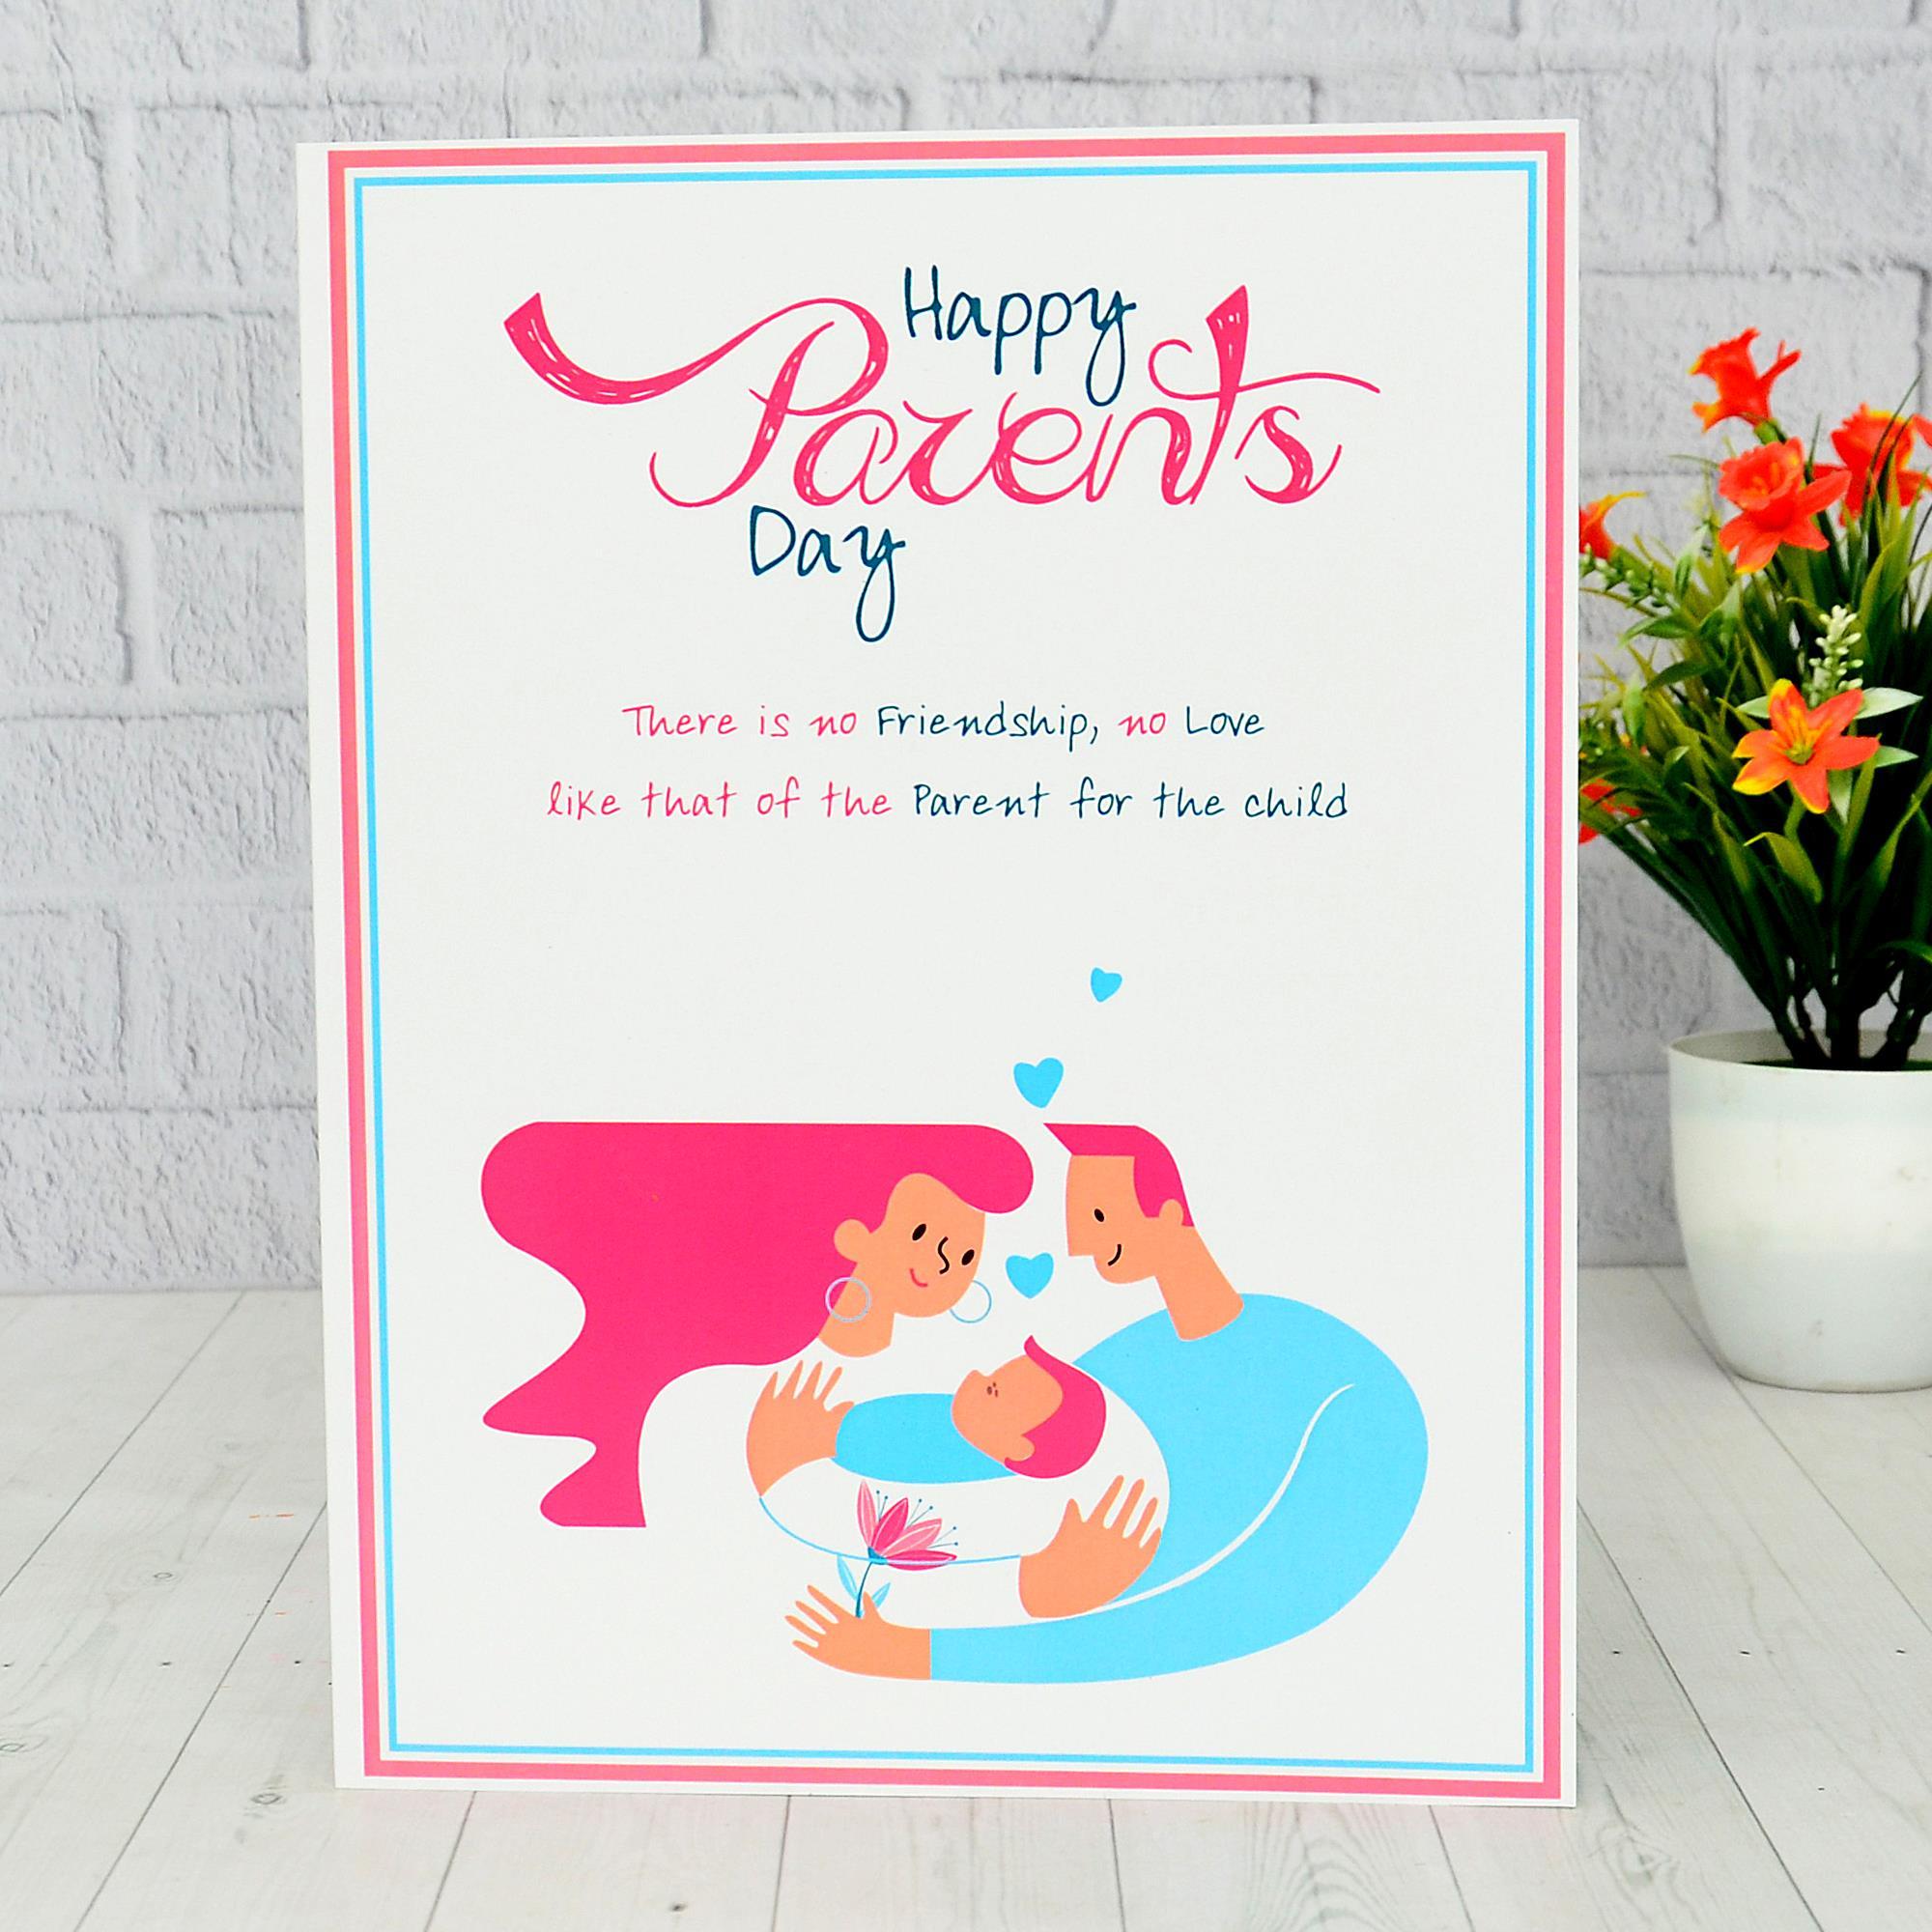 Parents Day Greeting Card